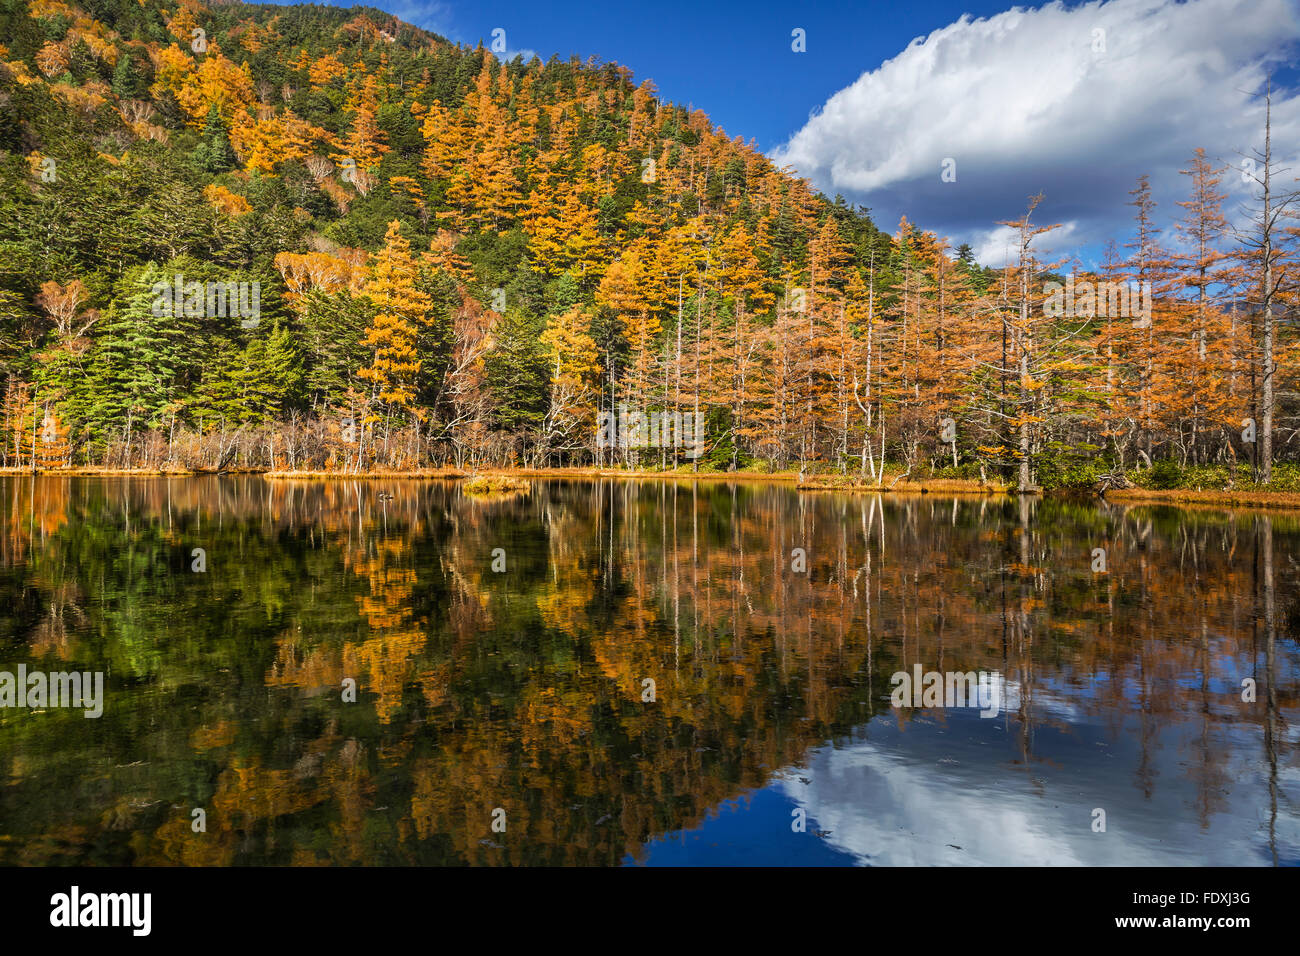 Colorful Autumn forest park in Hokkaido, Japan Stock Photo